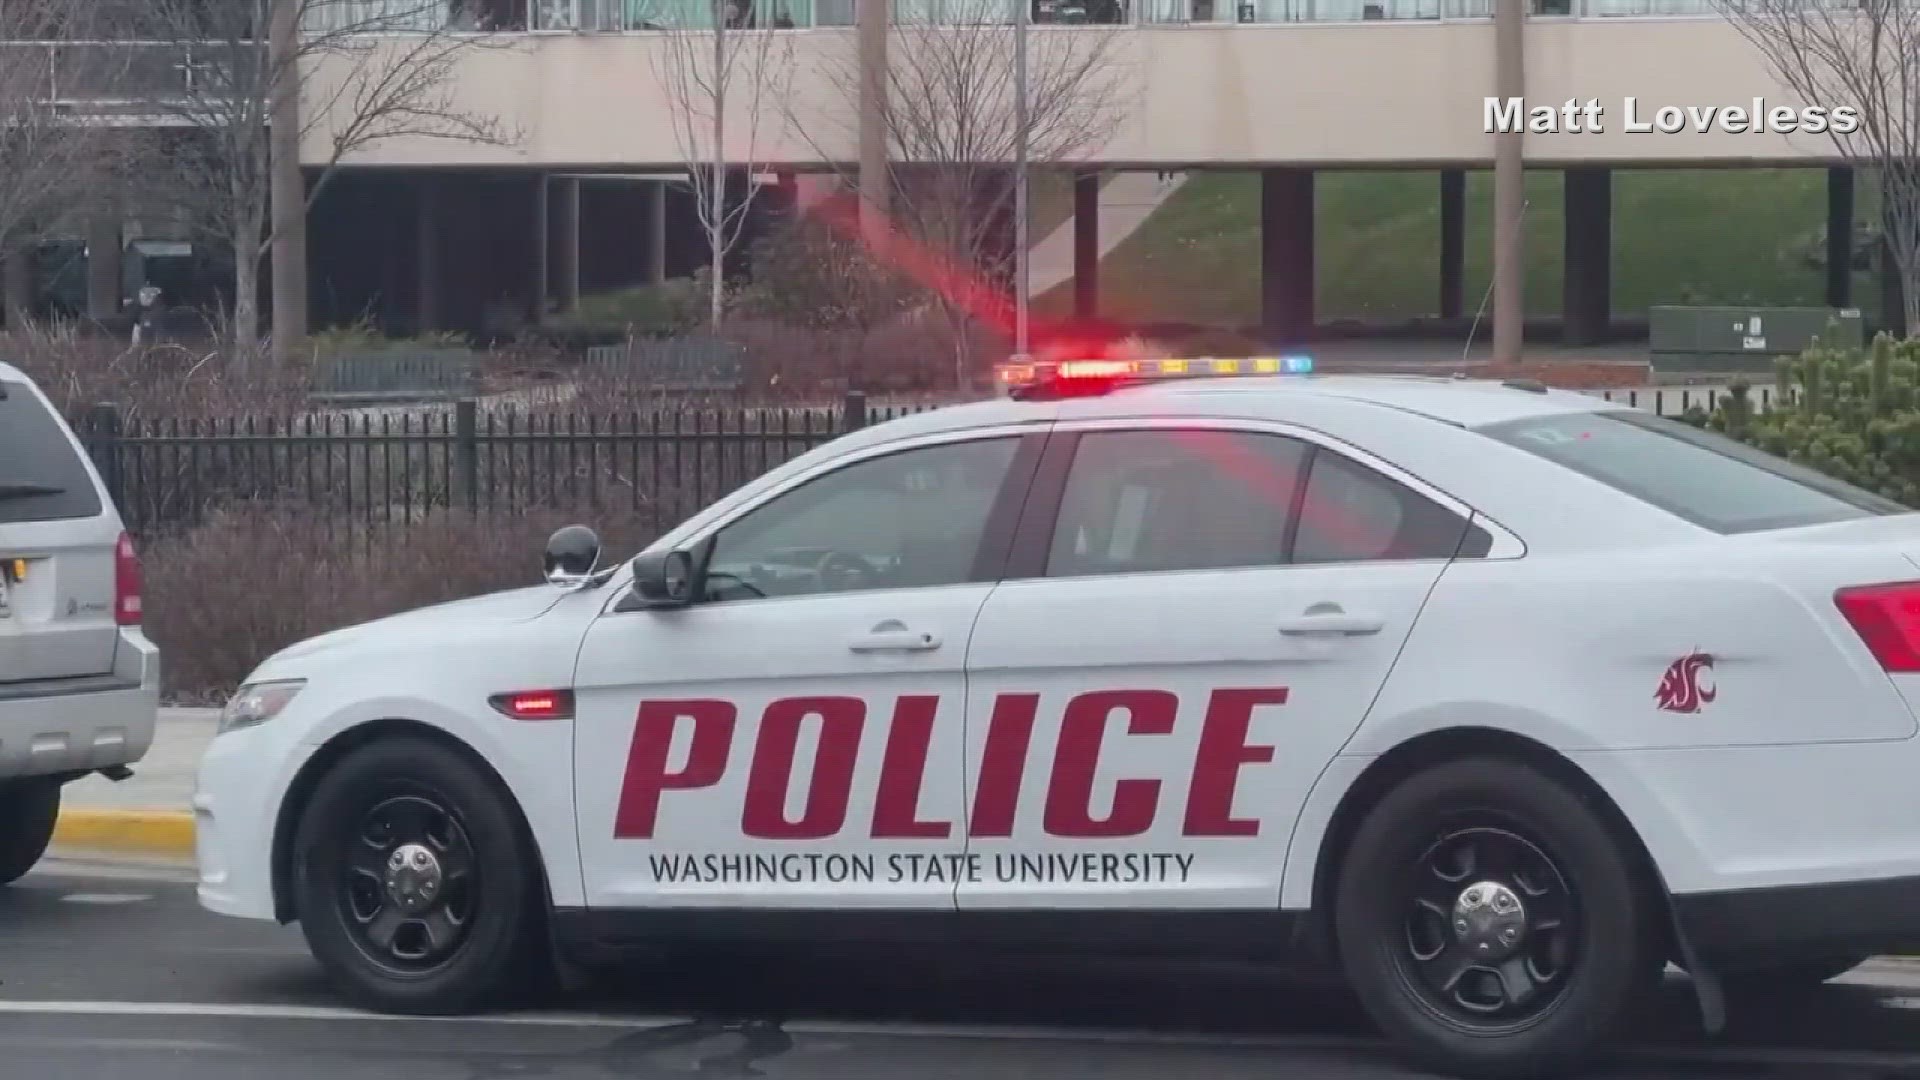 The man, identified as WSU student John Bazan, was arrested for obstructing an officer.